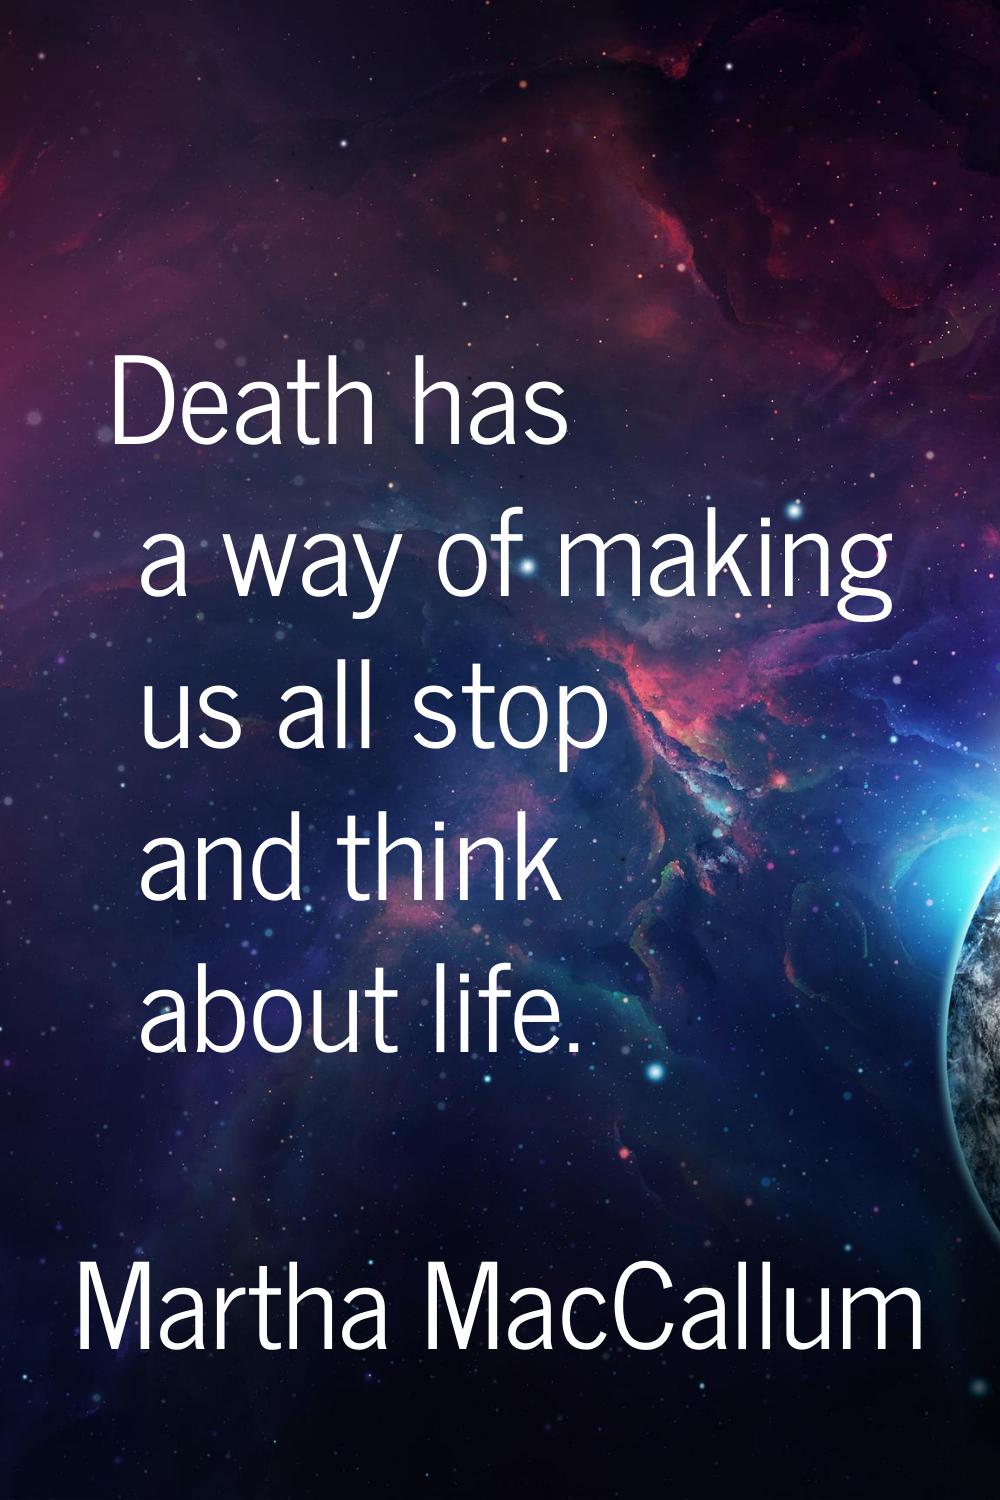 Death has a way of making us all stop and think about life.